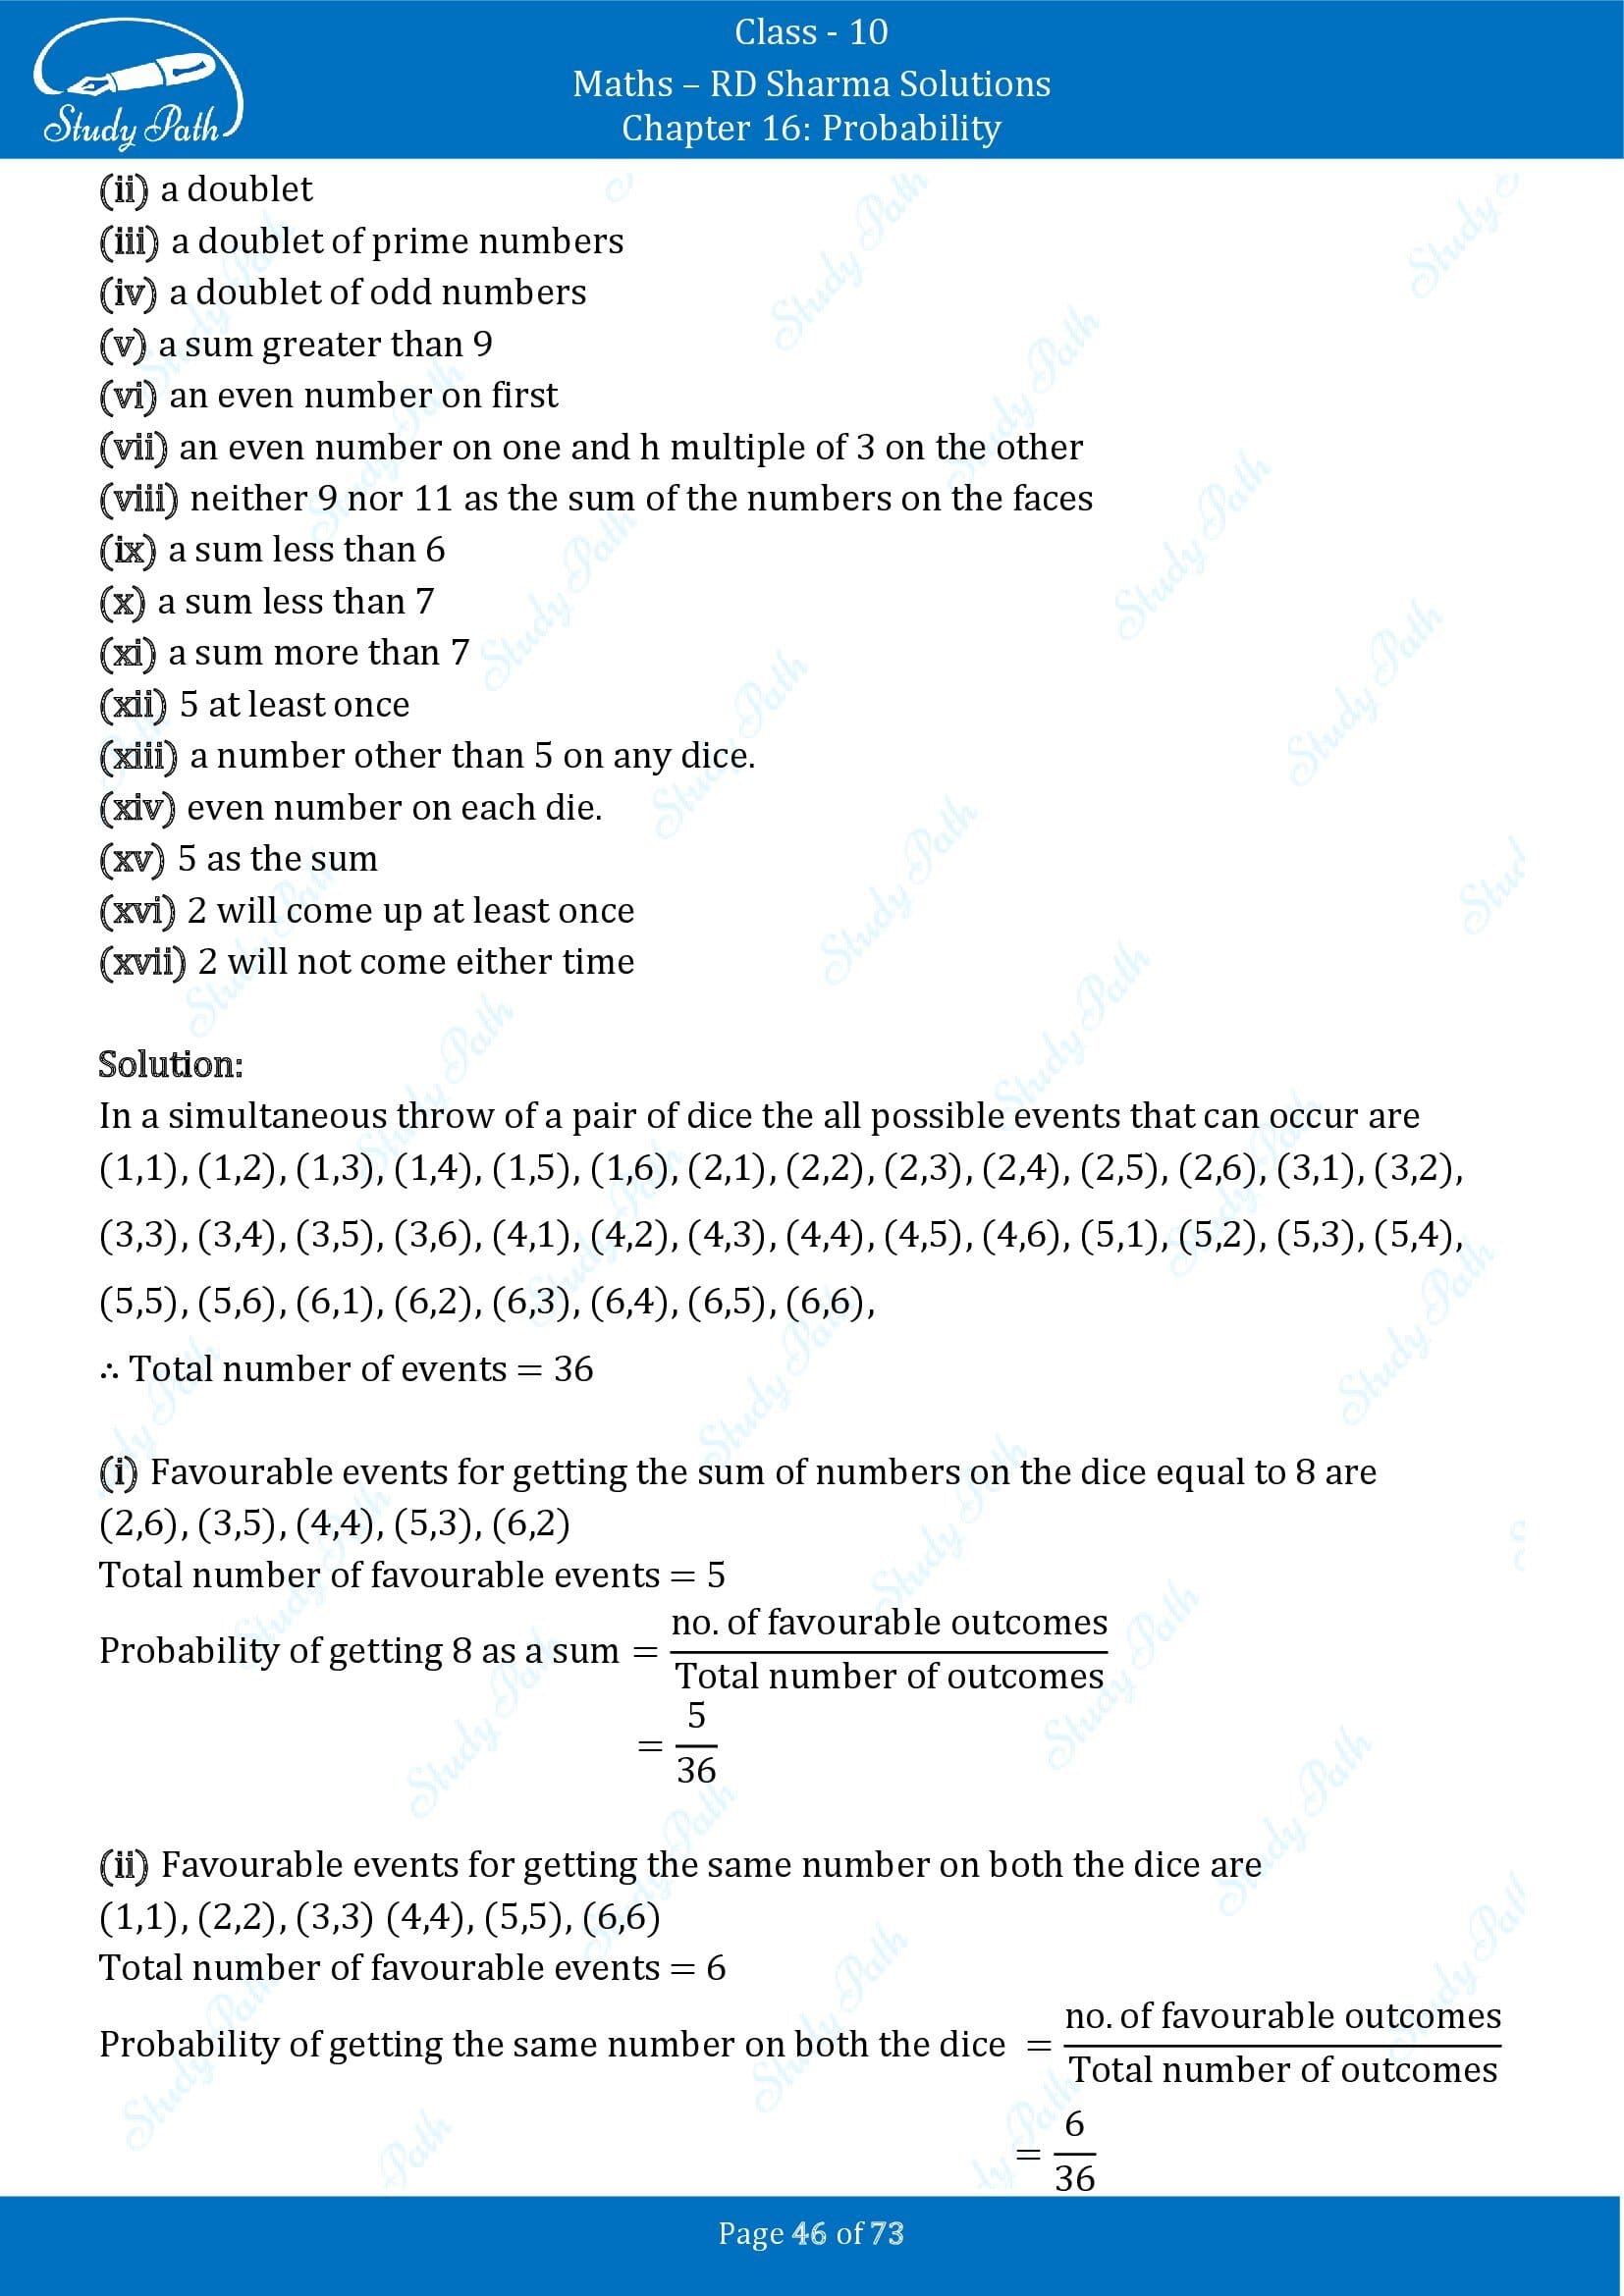 RD Sharma Solutions Class 10 Chapter 16 Probability Exercise 16.1 00046